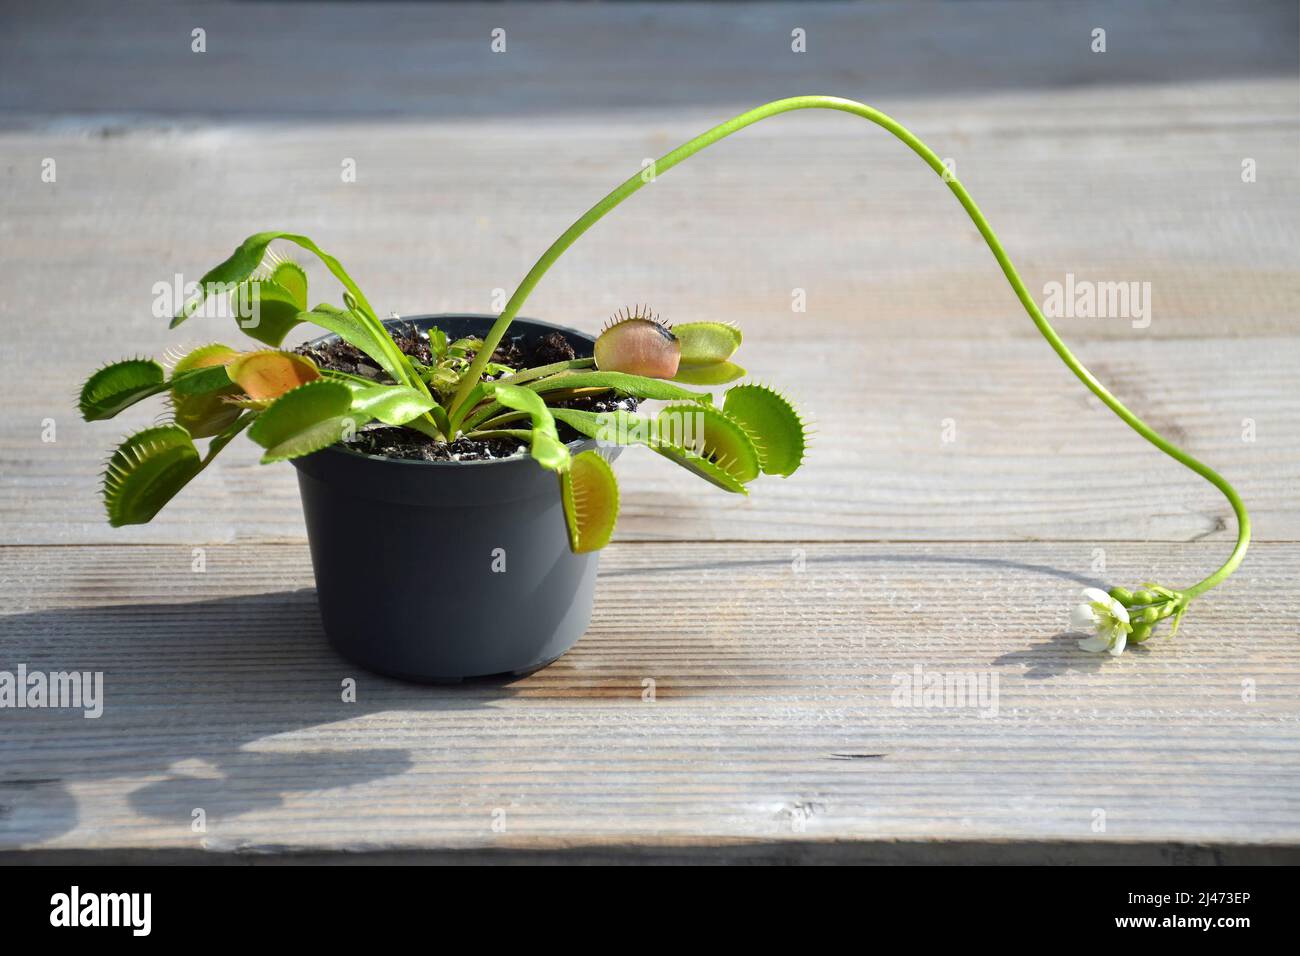 Flowering Venus Flytrap plant showing its long flower stem. Close up of Dionaea Muscipula in a pot Stock Photo